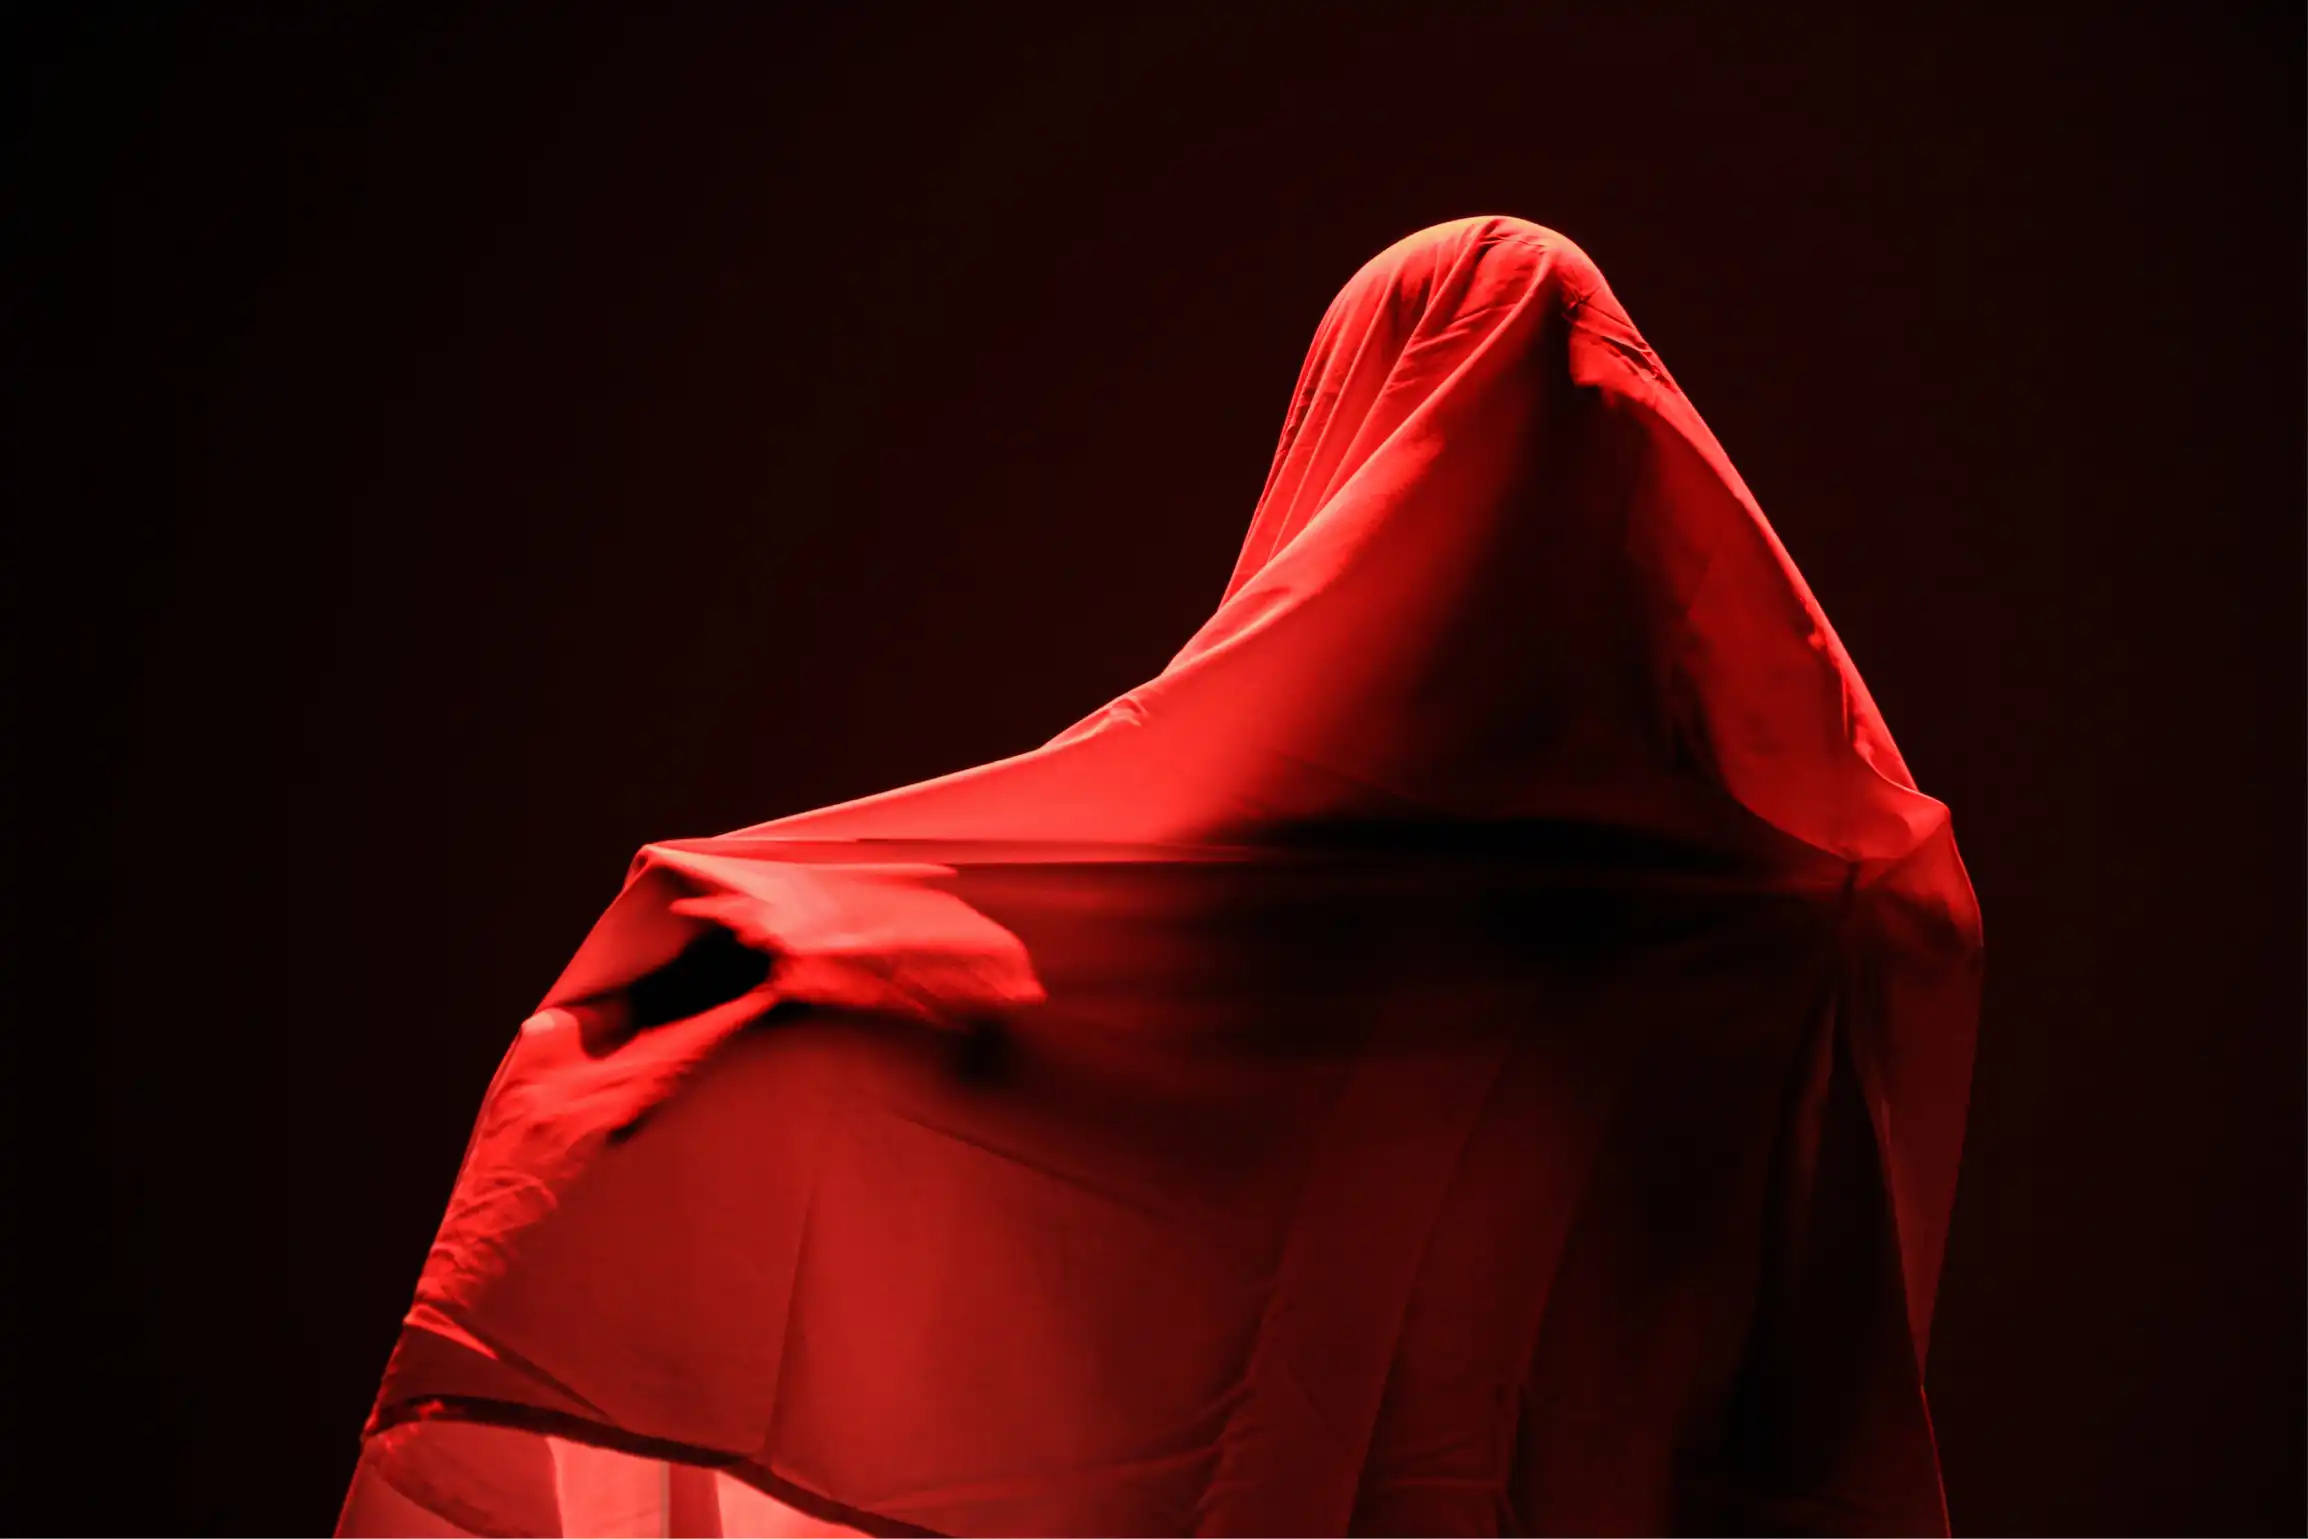 Human figure covered by red veil